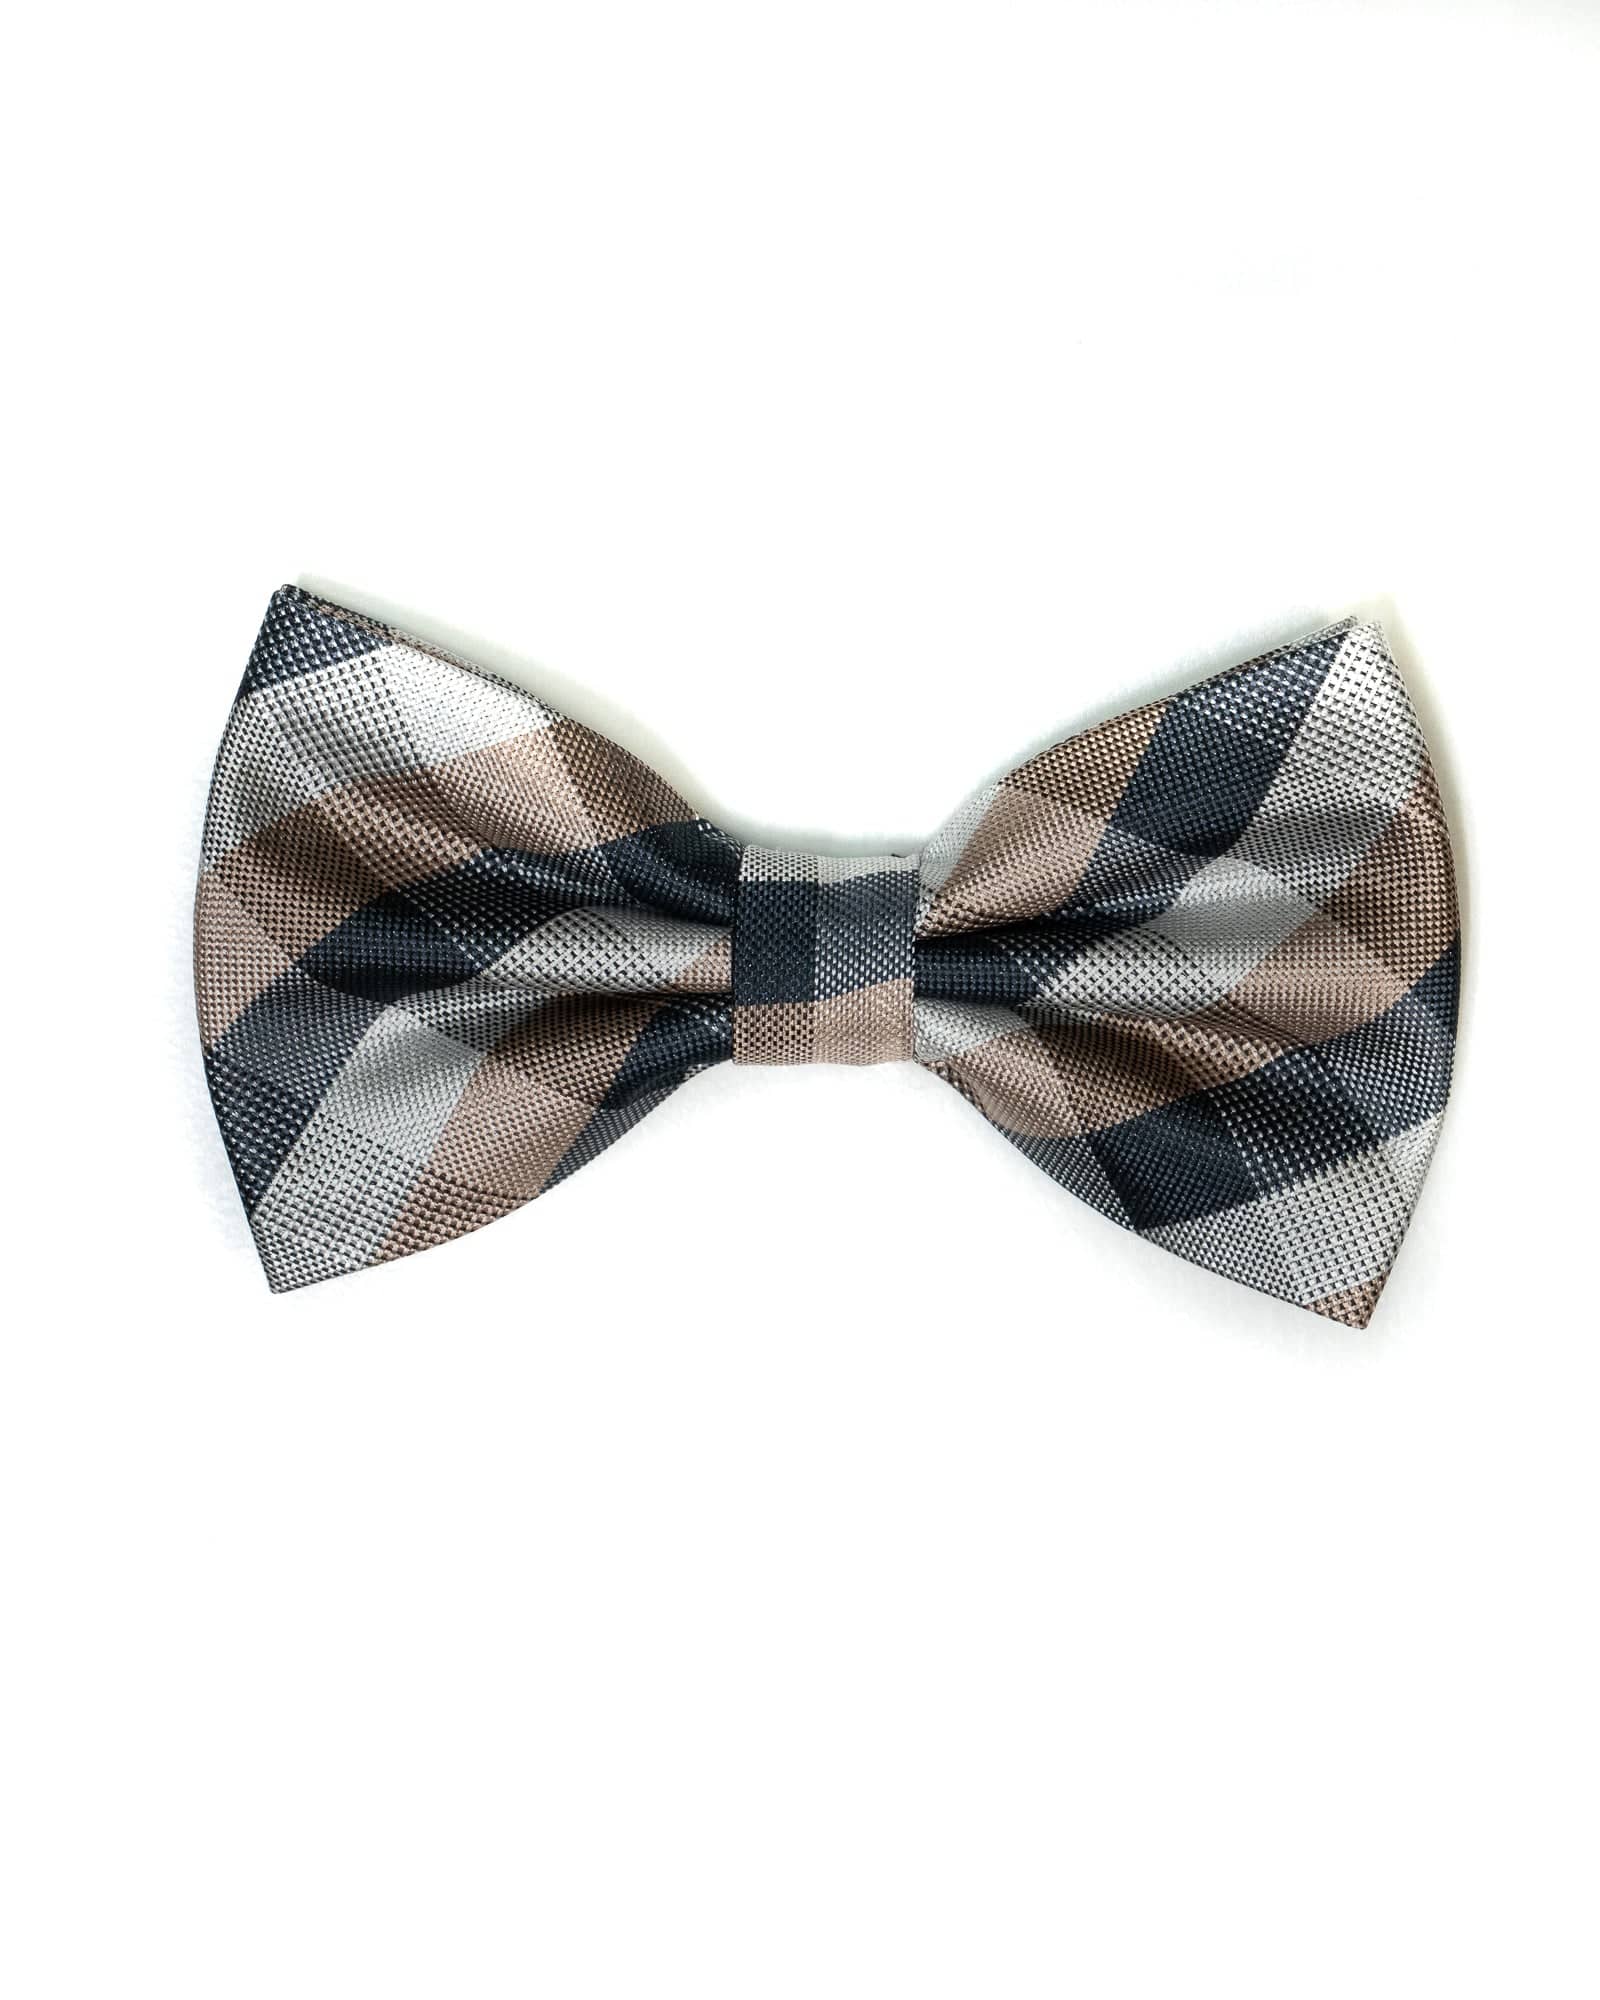 Bow Tie In Plaid Pattern Tan & Navy - Rainwater's Men's Clothing and Tuxedo Rental